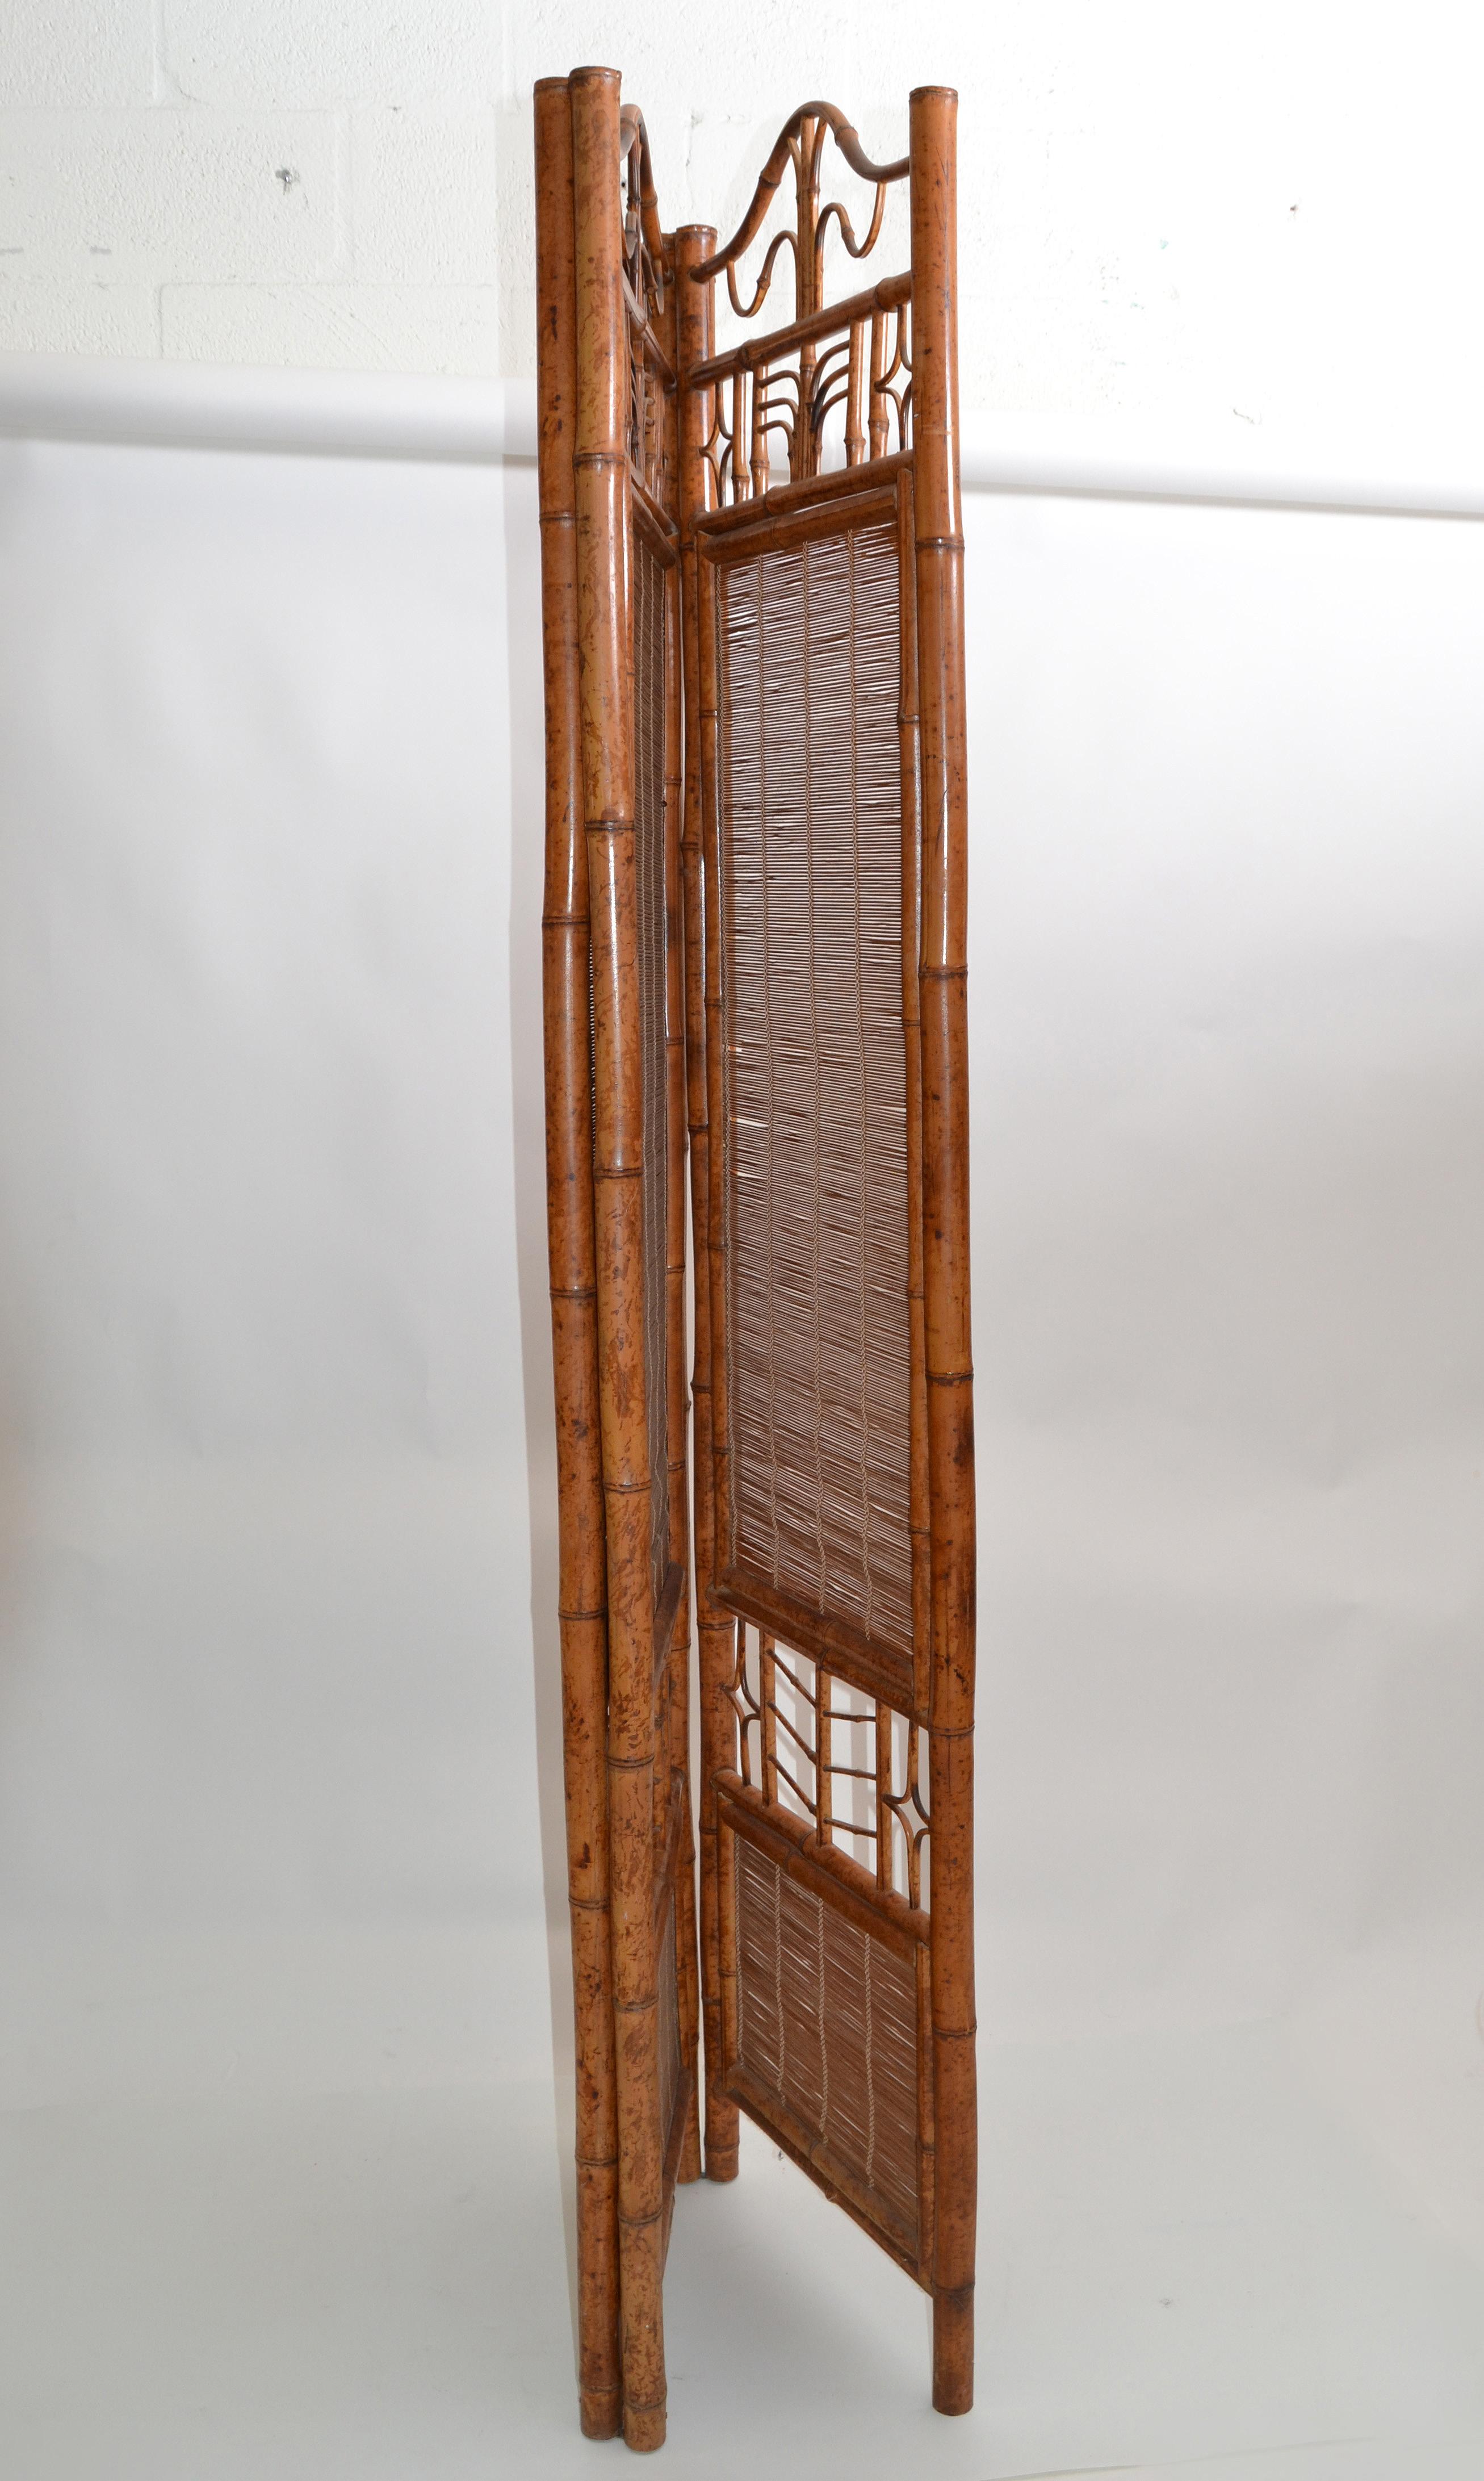 20th Century One Mid-Century Modern Tall Solid Bamboo Wood Room Divider Screen Partition For Sale